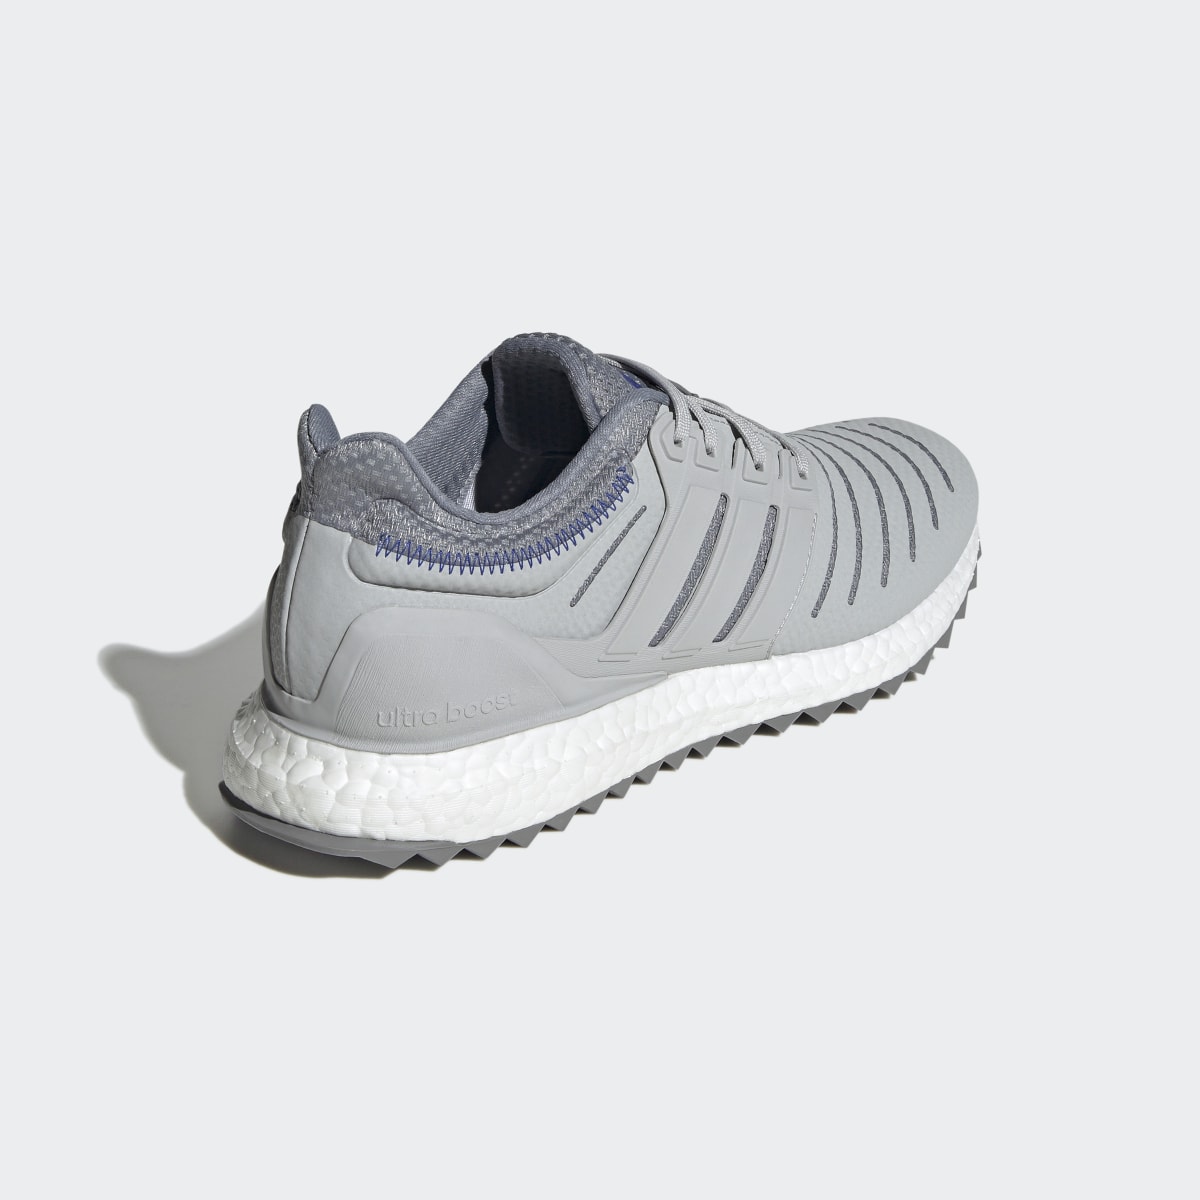 Adidas Ultraboost DNA XXII Lifestyle Running Sportswear Capsule Collection Shoes. 6